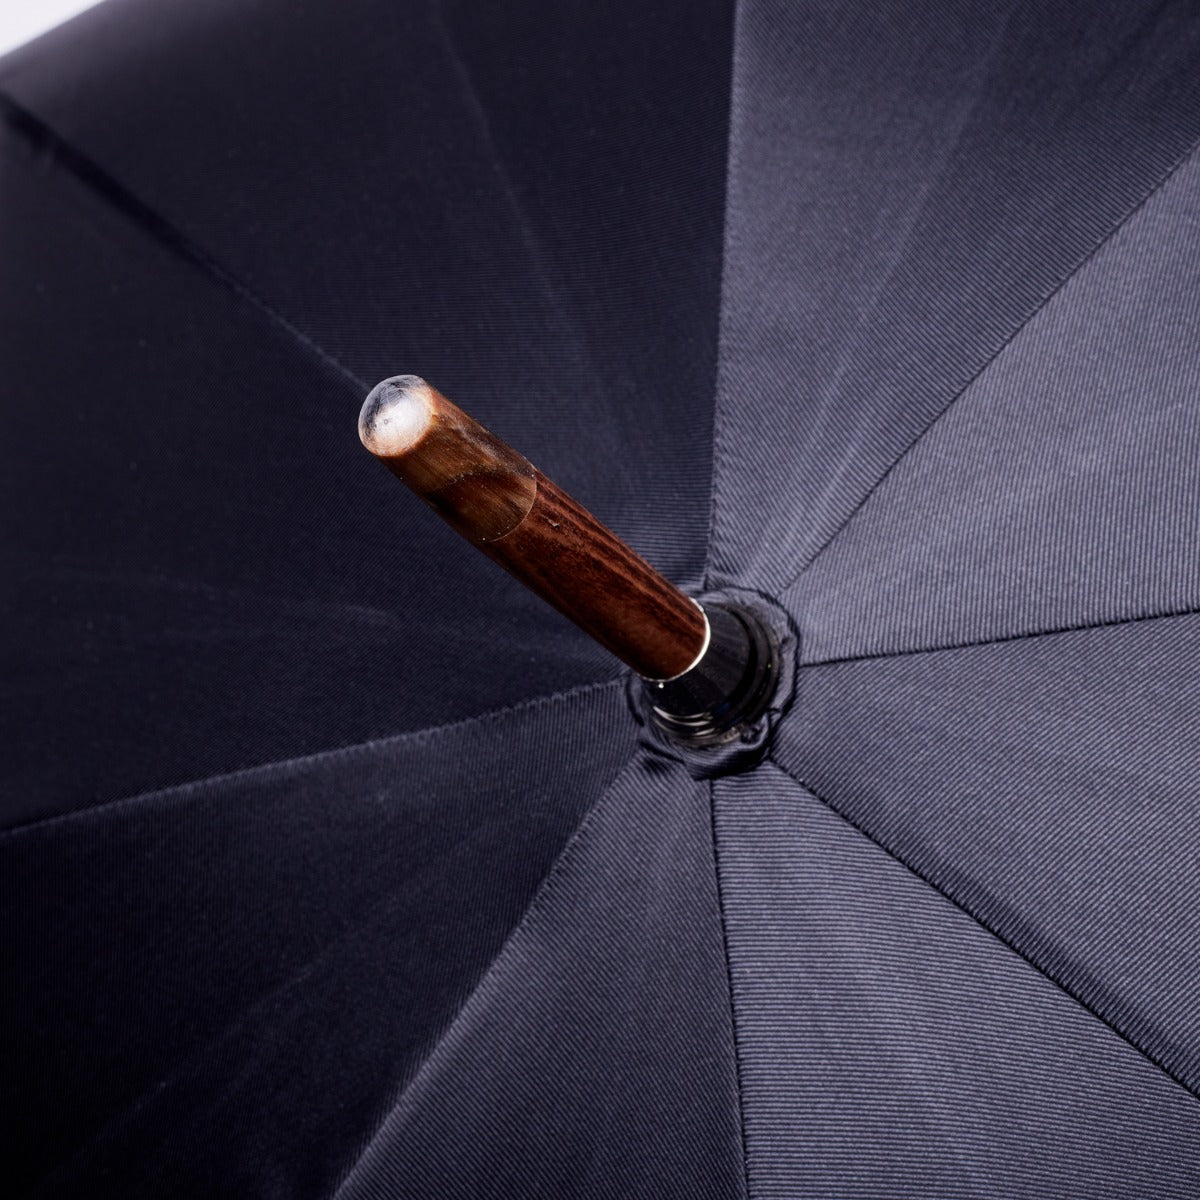 A Bamboo Handle Umbrella with Black Canopy from KirbyAllison.com.